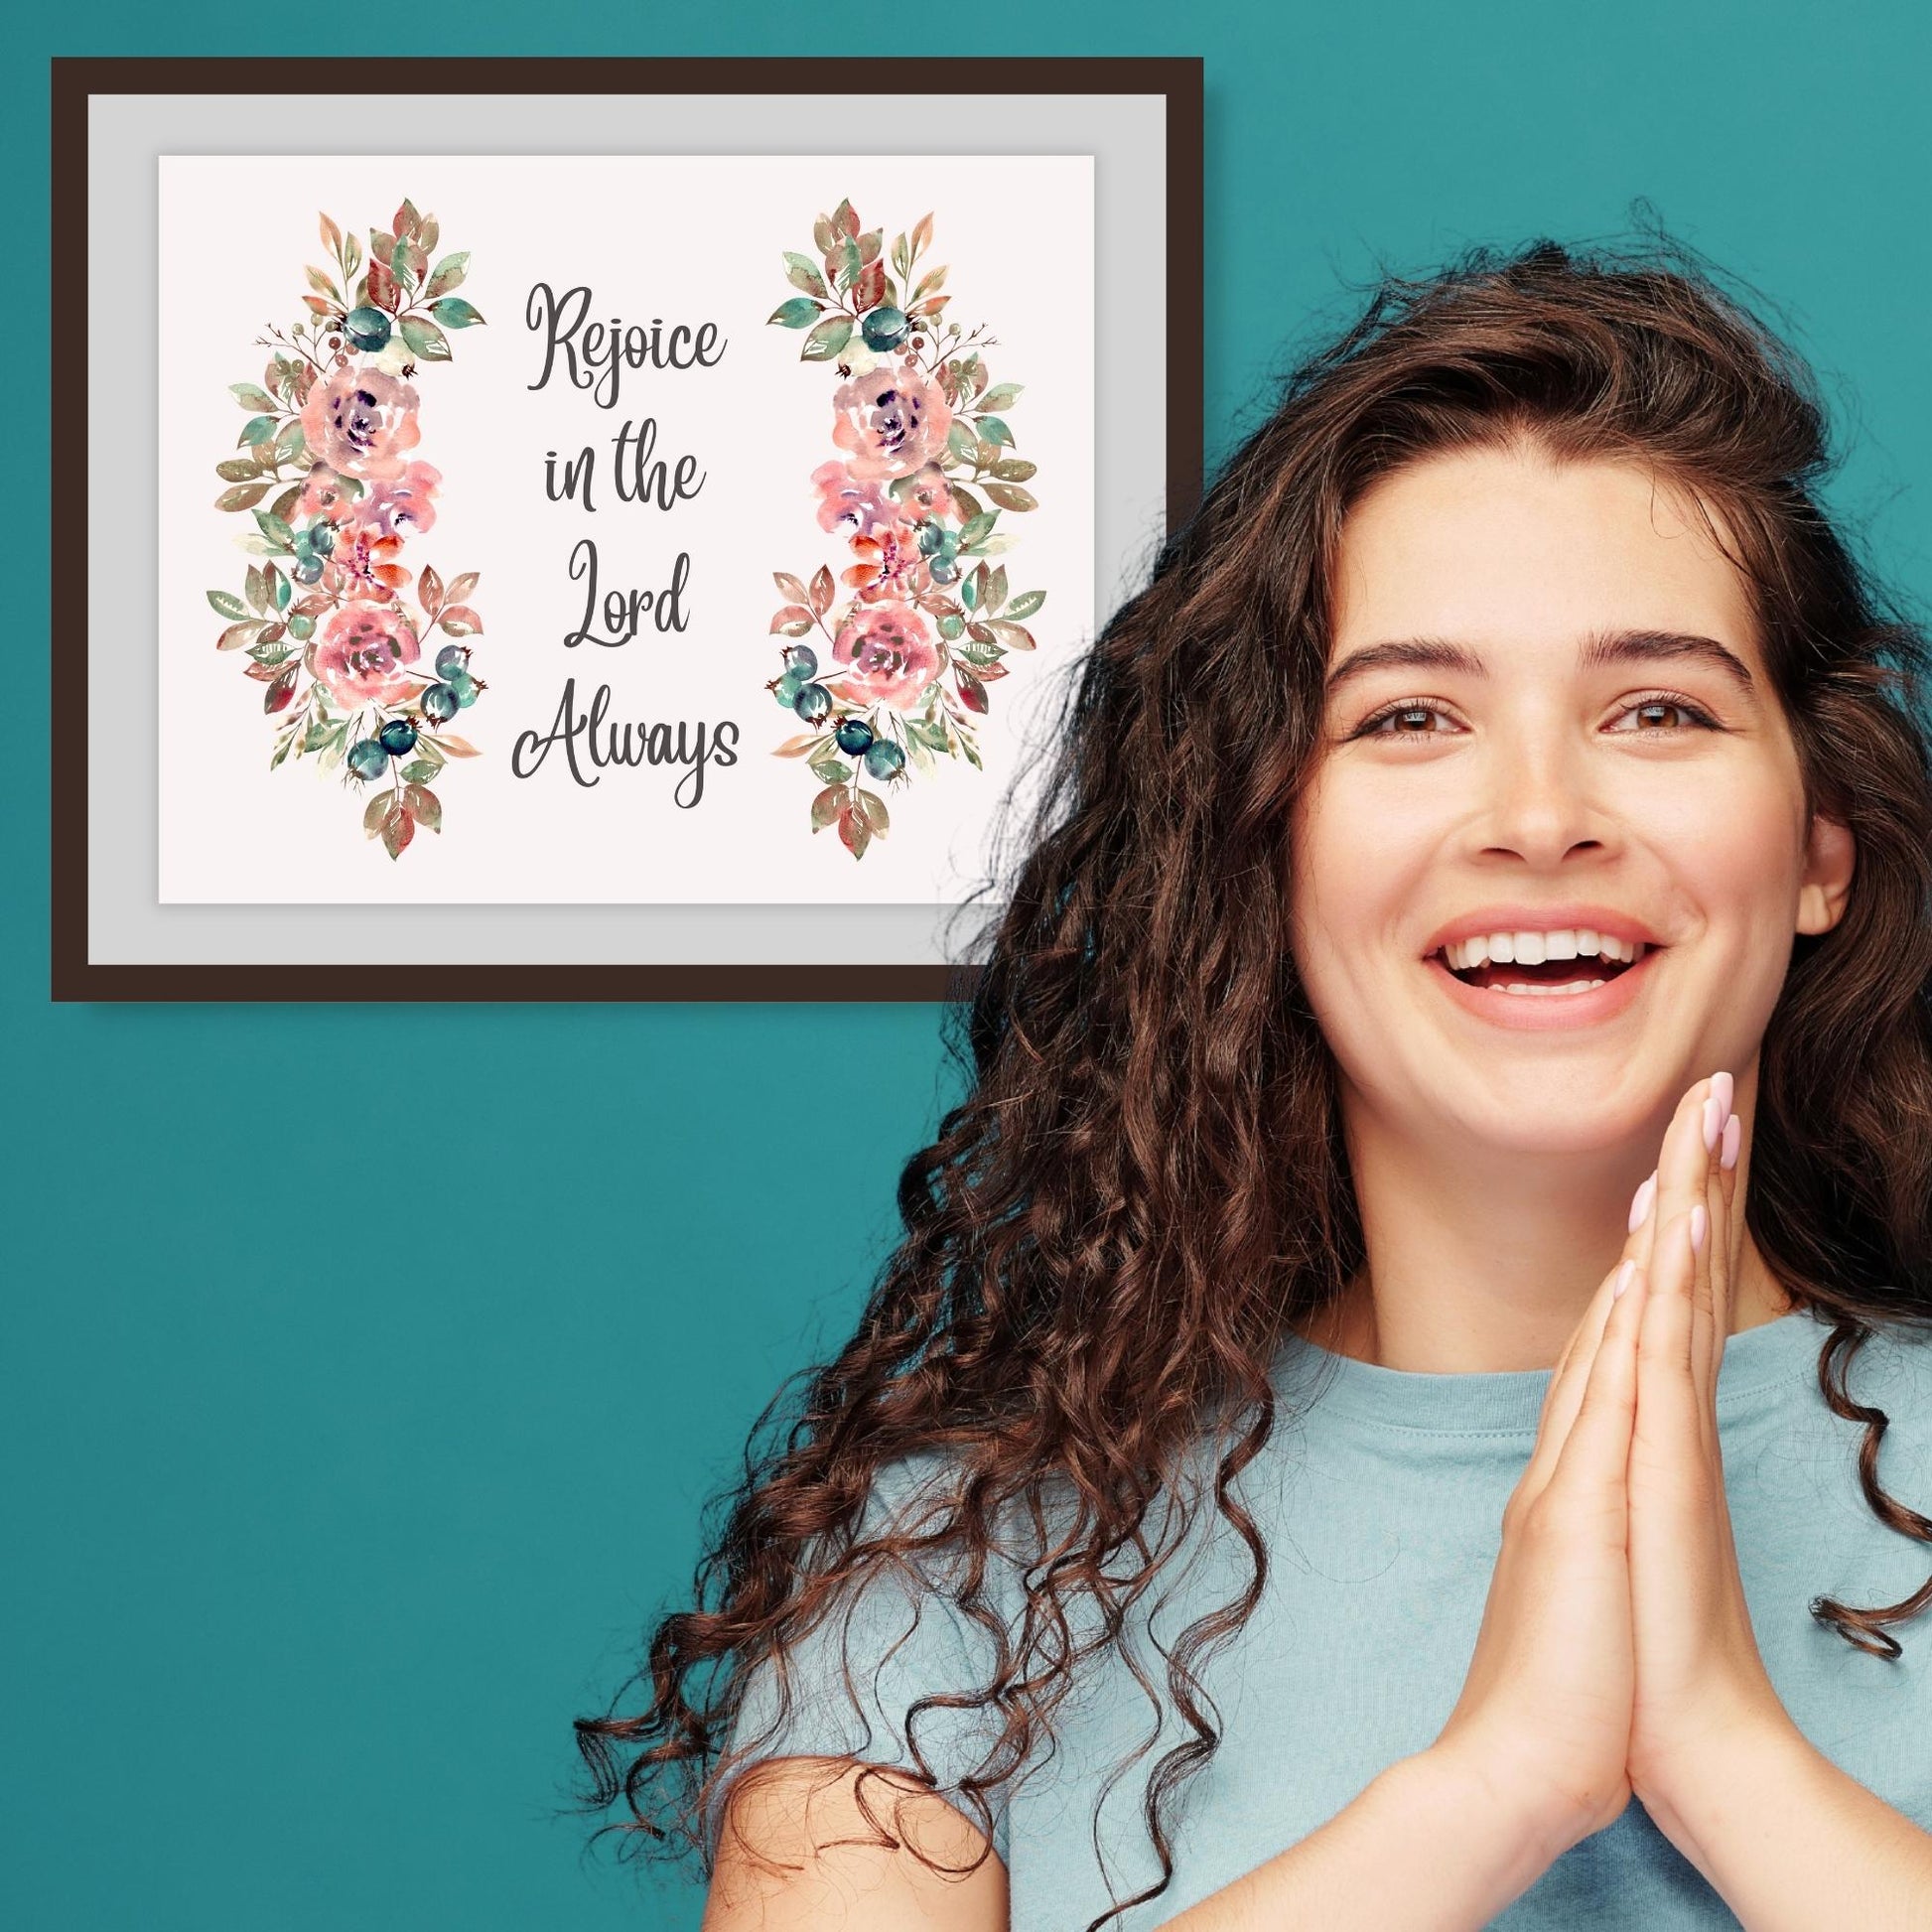 Inspirational Word Art - Rejoice in the Lord Always - Vintage Style Wall Decor (8x10 print) | Vintage Style Floral Wall Art shown in wood frame with neutral mat board next to joyful girl against teal wall color | oak7west.com